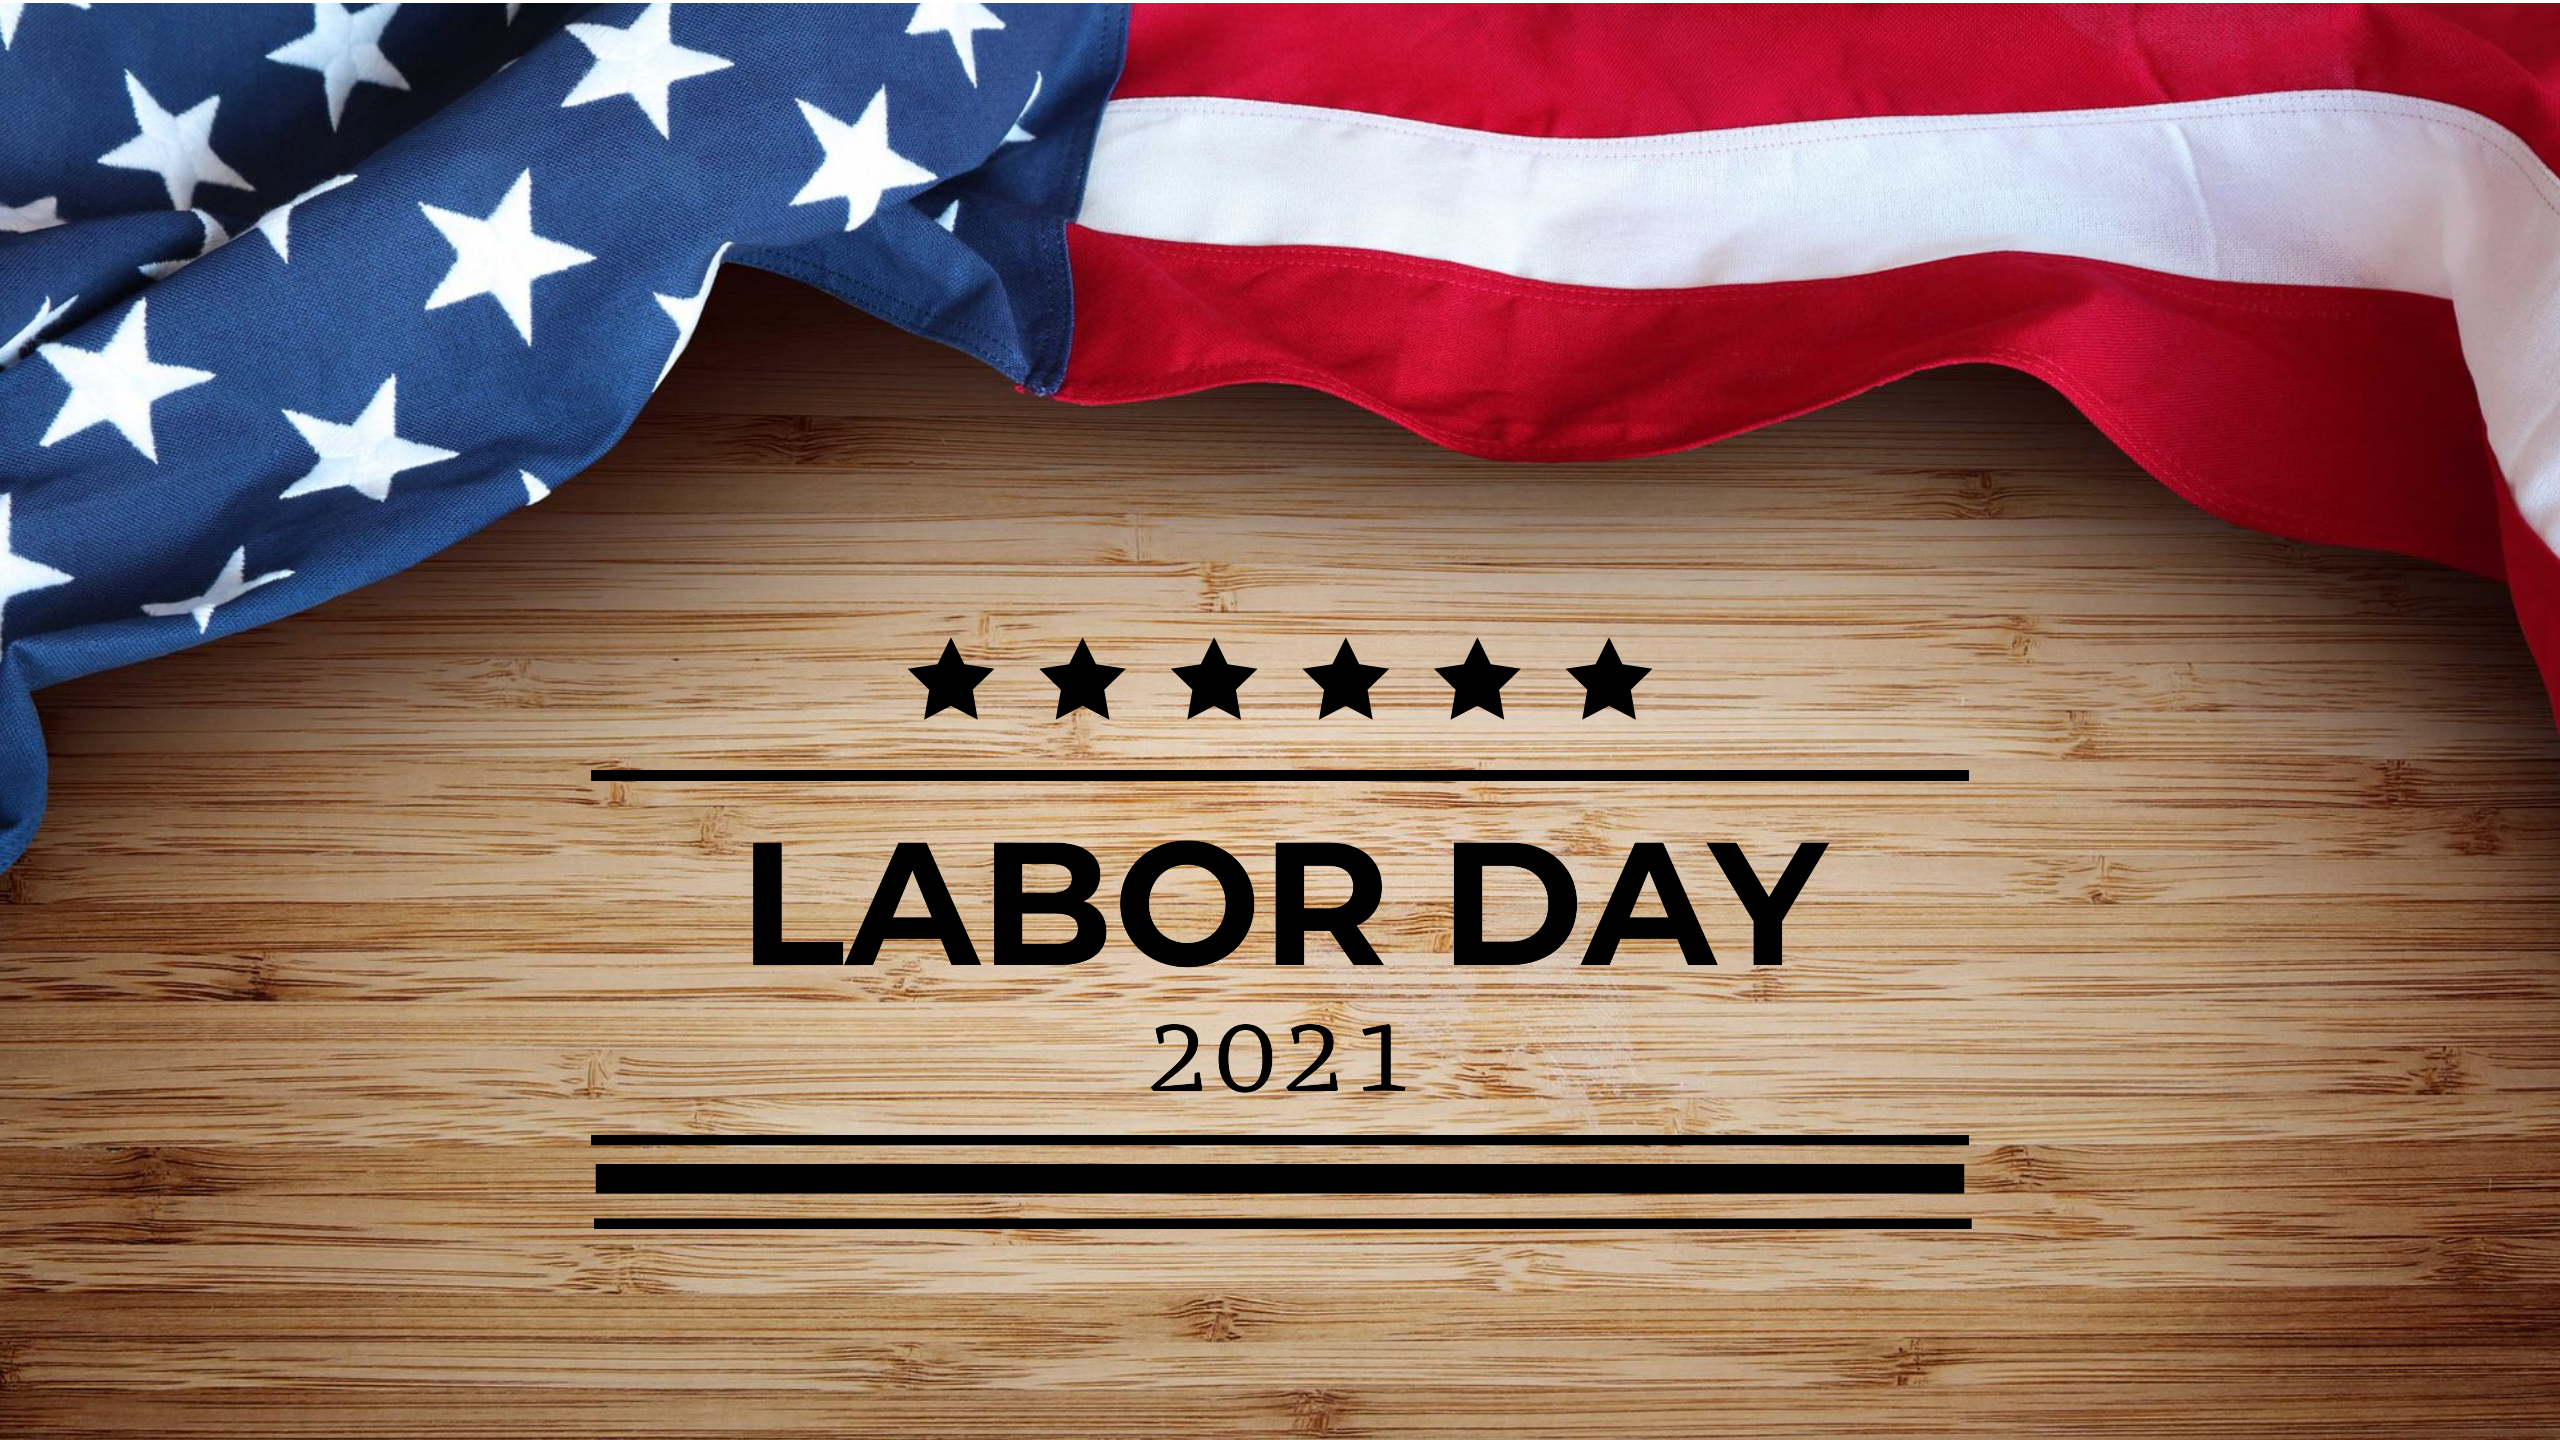 Office closed for Labor Day 2021